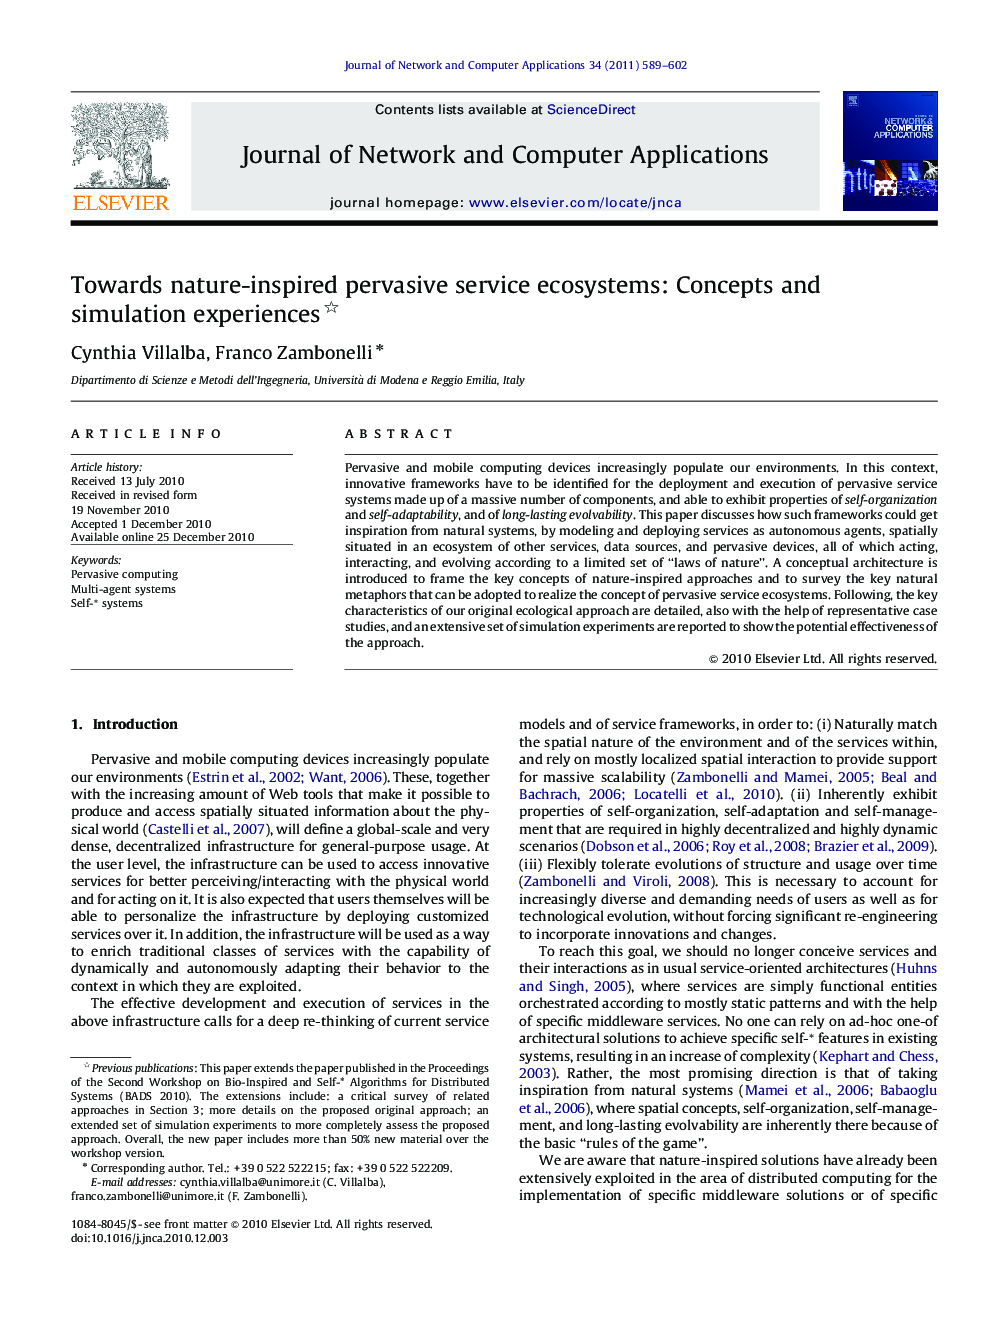 Towards nature-inspired pervasive service ecosystems: Concepts and simulation experiences 